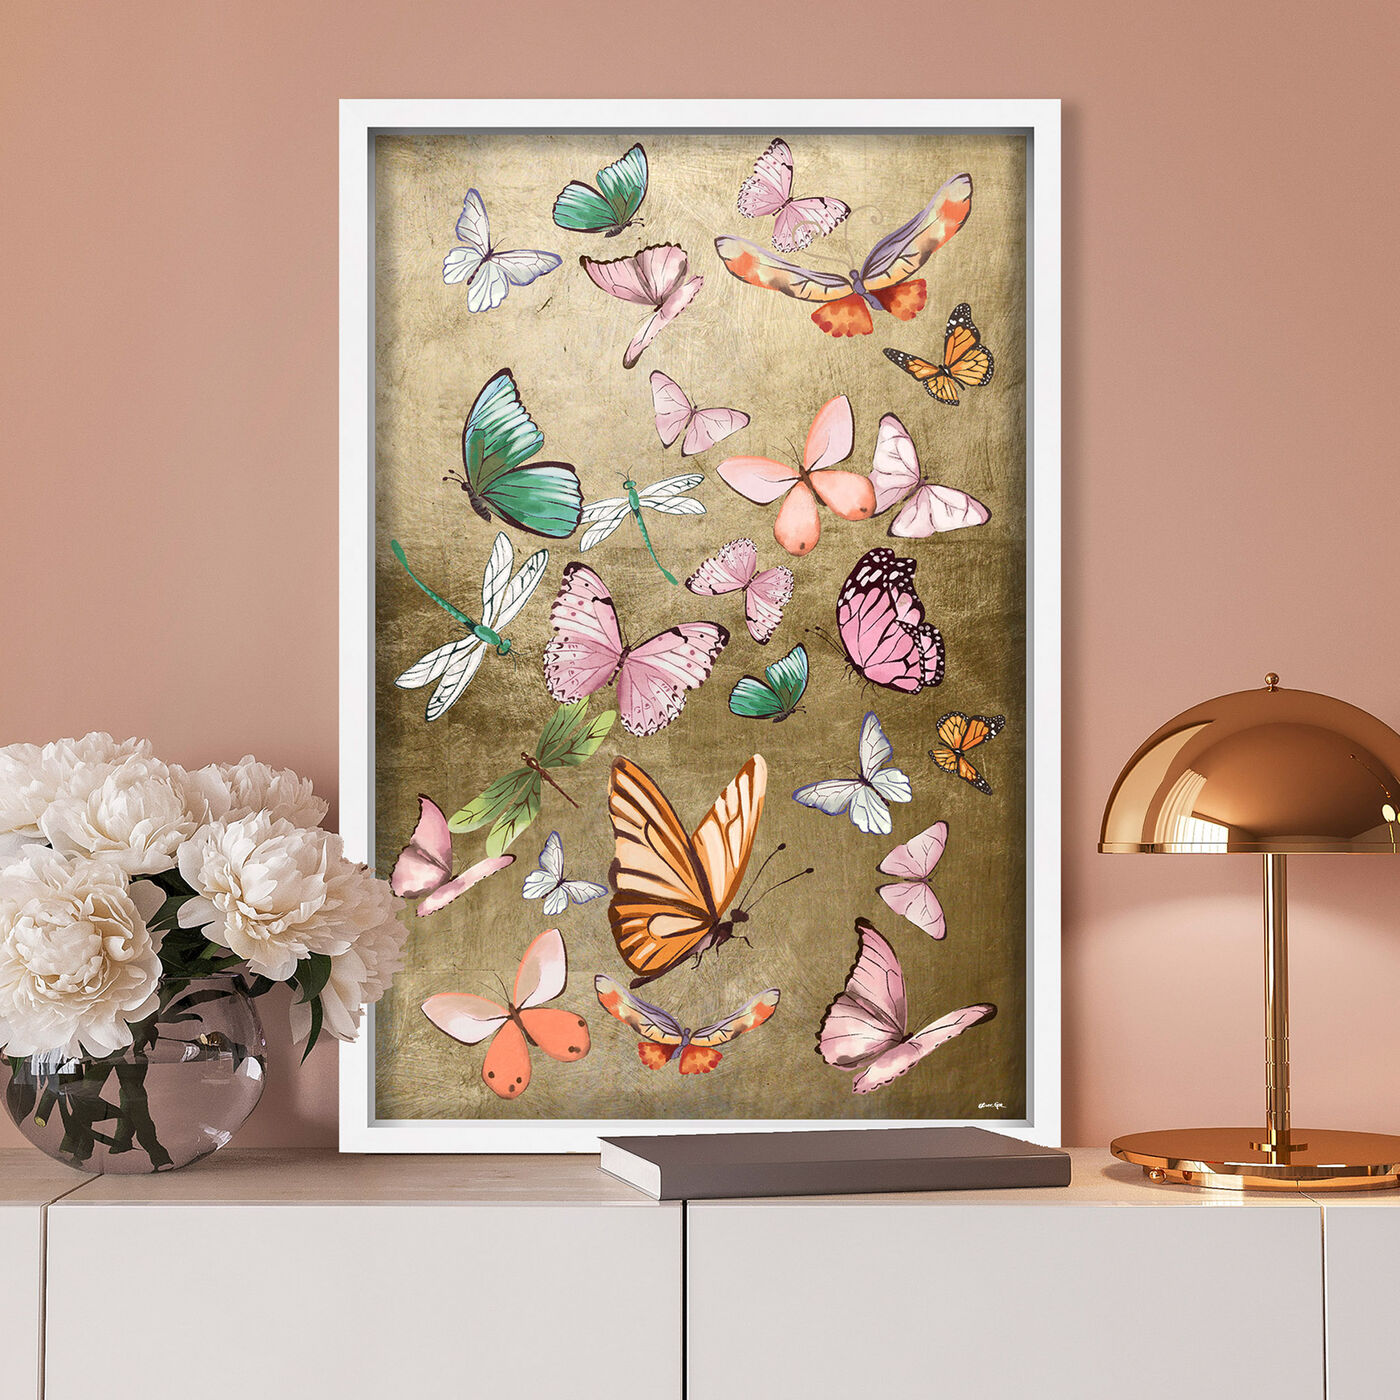 With Leaf Hand-Applied Art Gold | Flying Oliver by Animals Gold - Gal Over The Wall